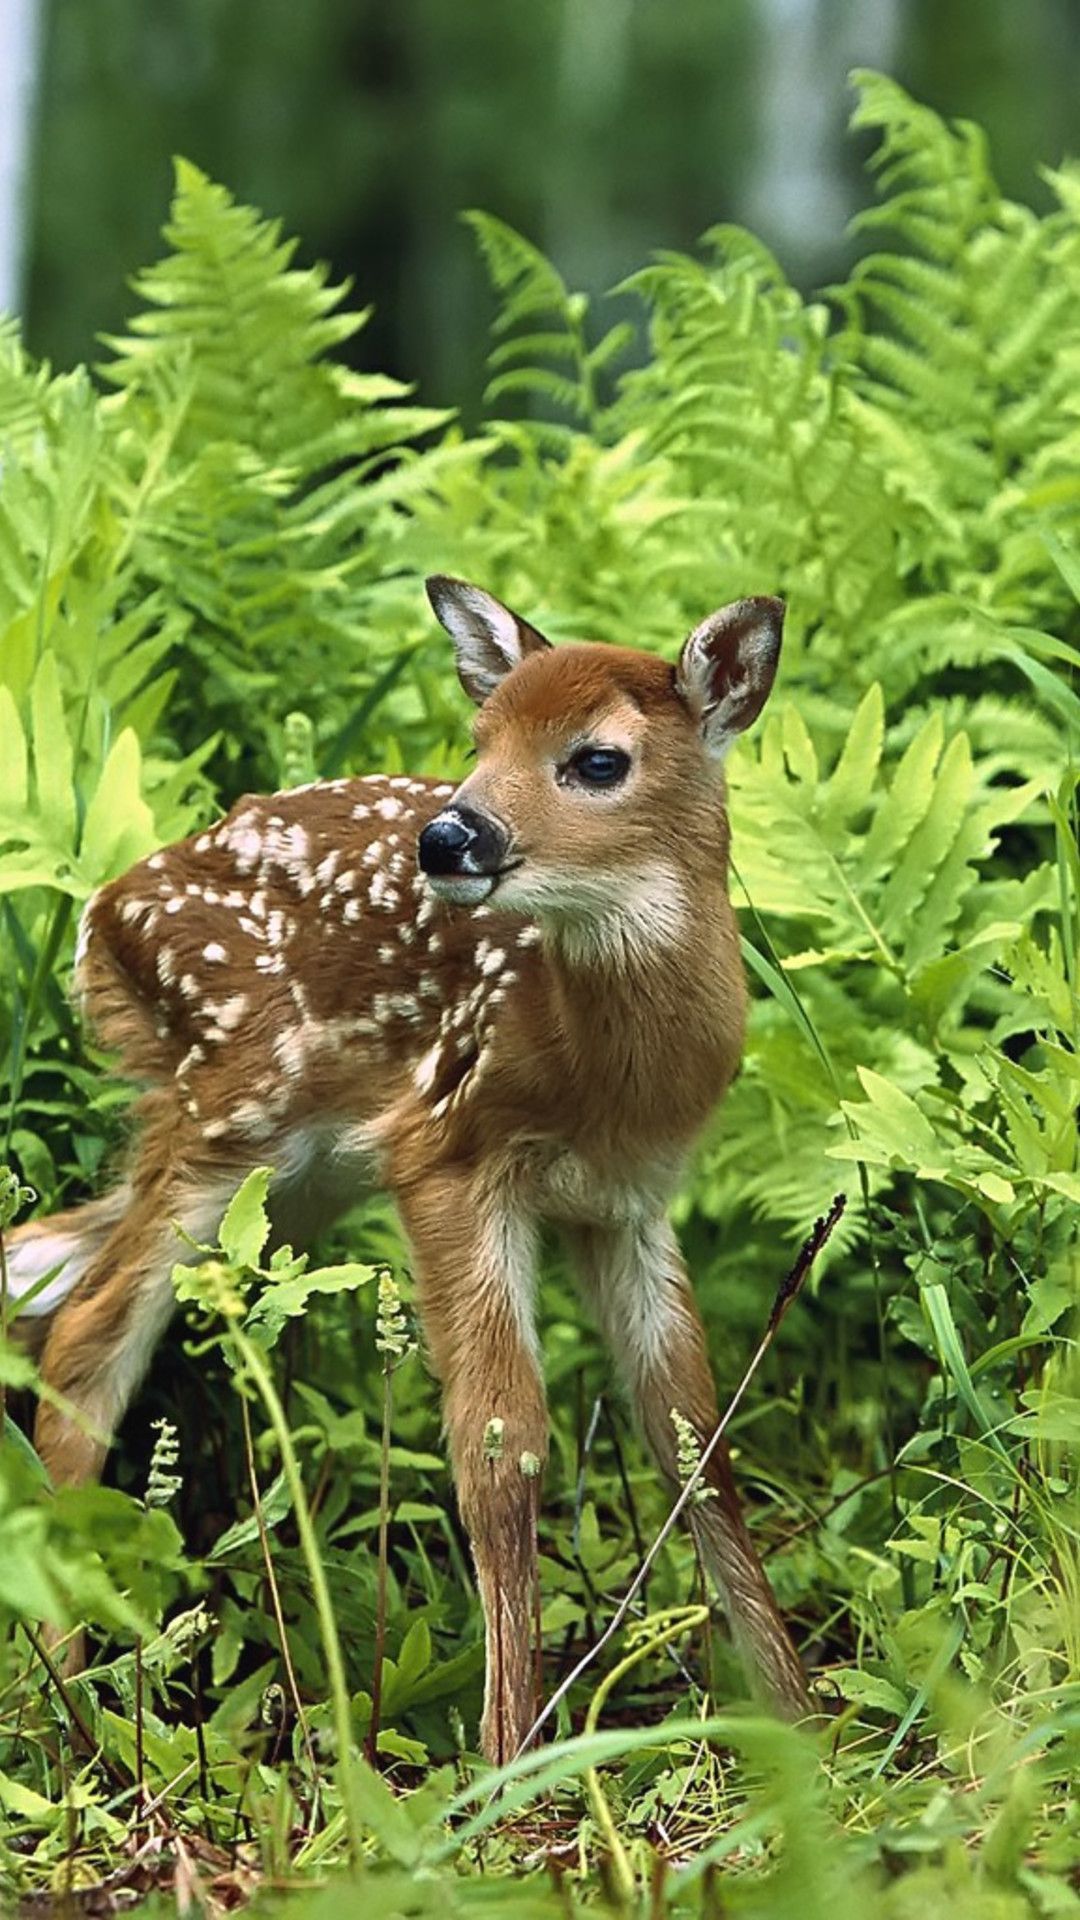 Wallpaper Download 1080x1920 A sweet baby deer in the grass in forest. Wild animals wallpaper. Animals Wallpaper.. Wild animal wallpaper, Animals, Animals wild